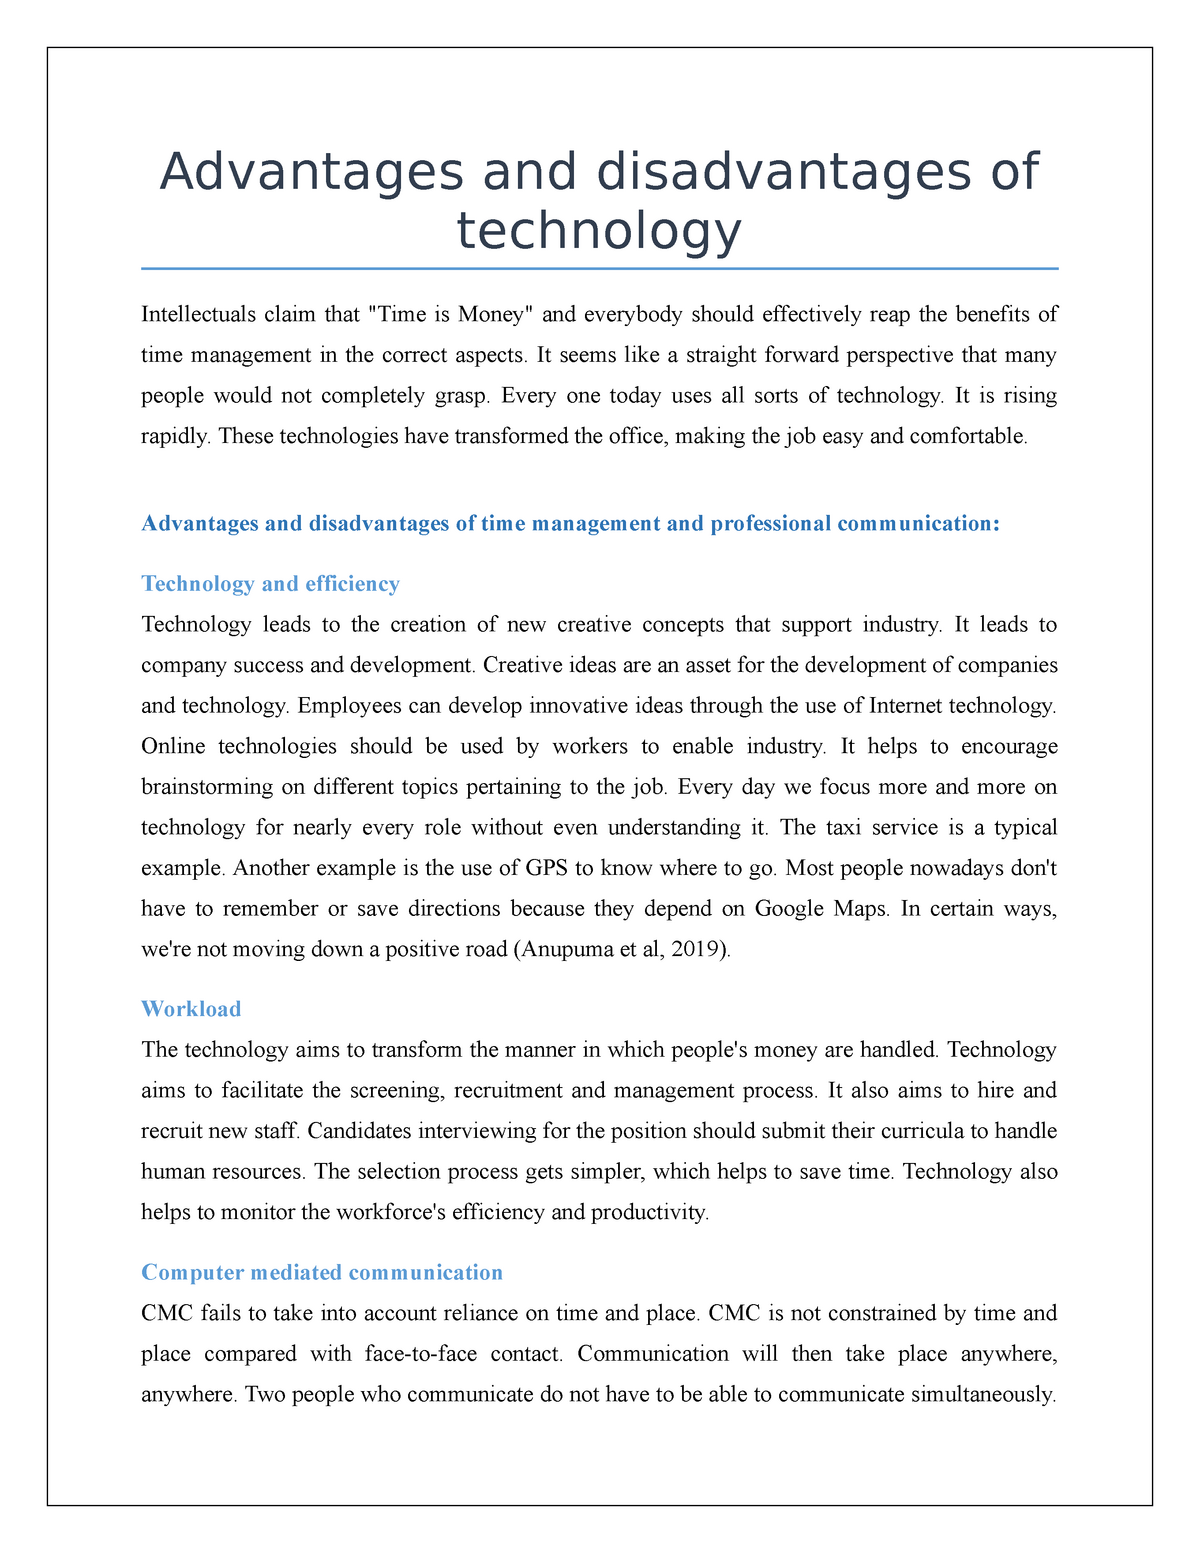 essay on advantage and disadvantages of technology